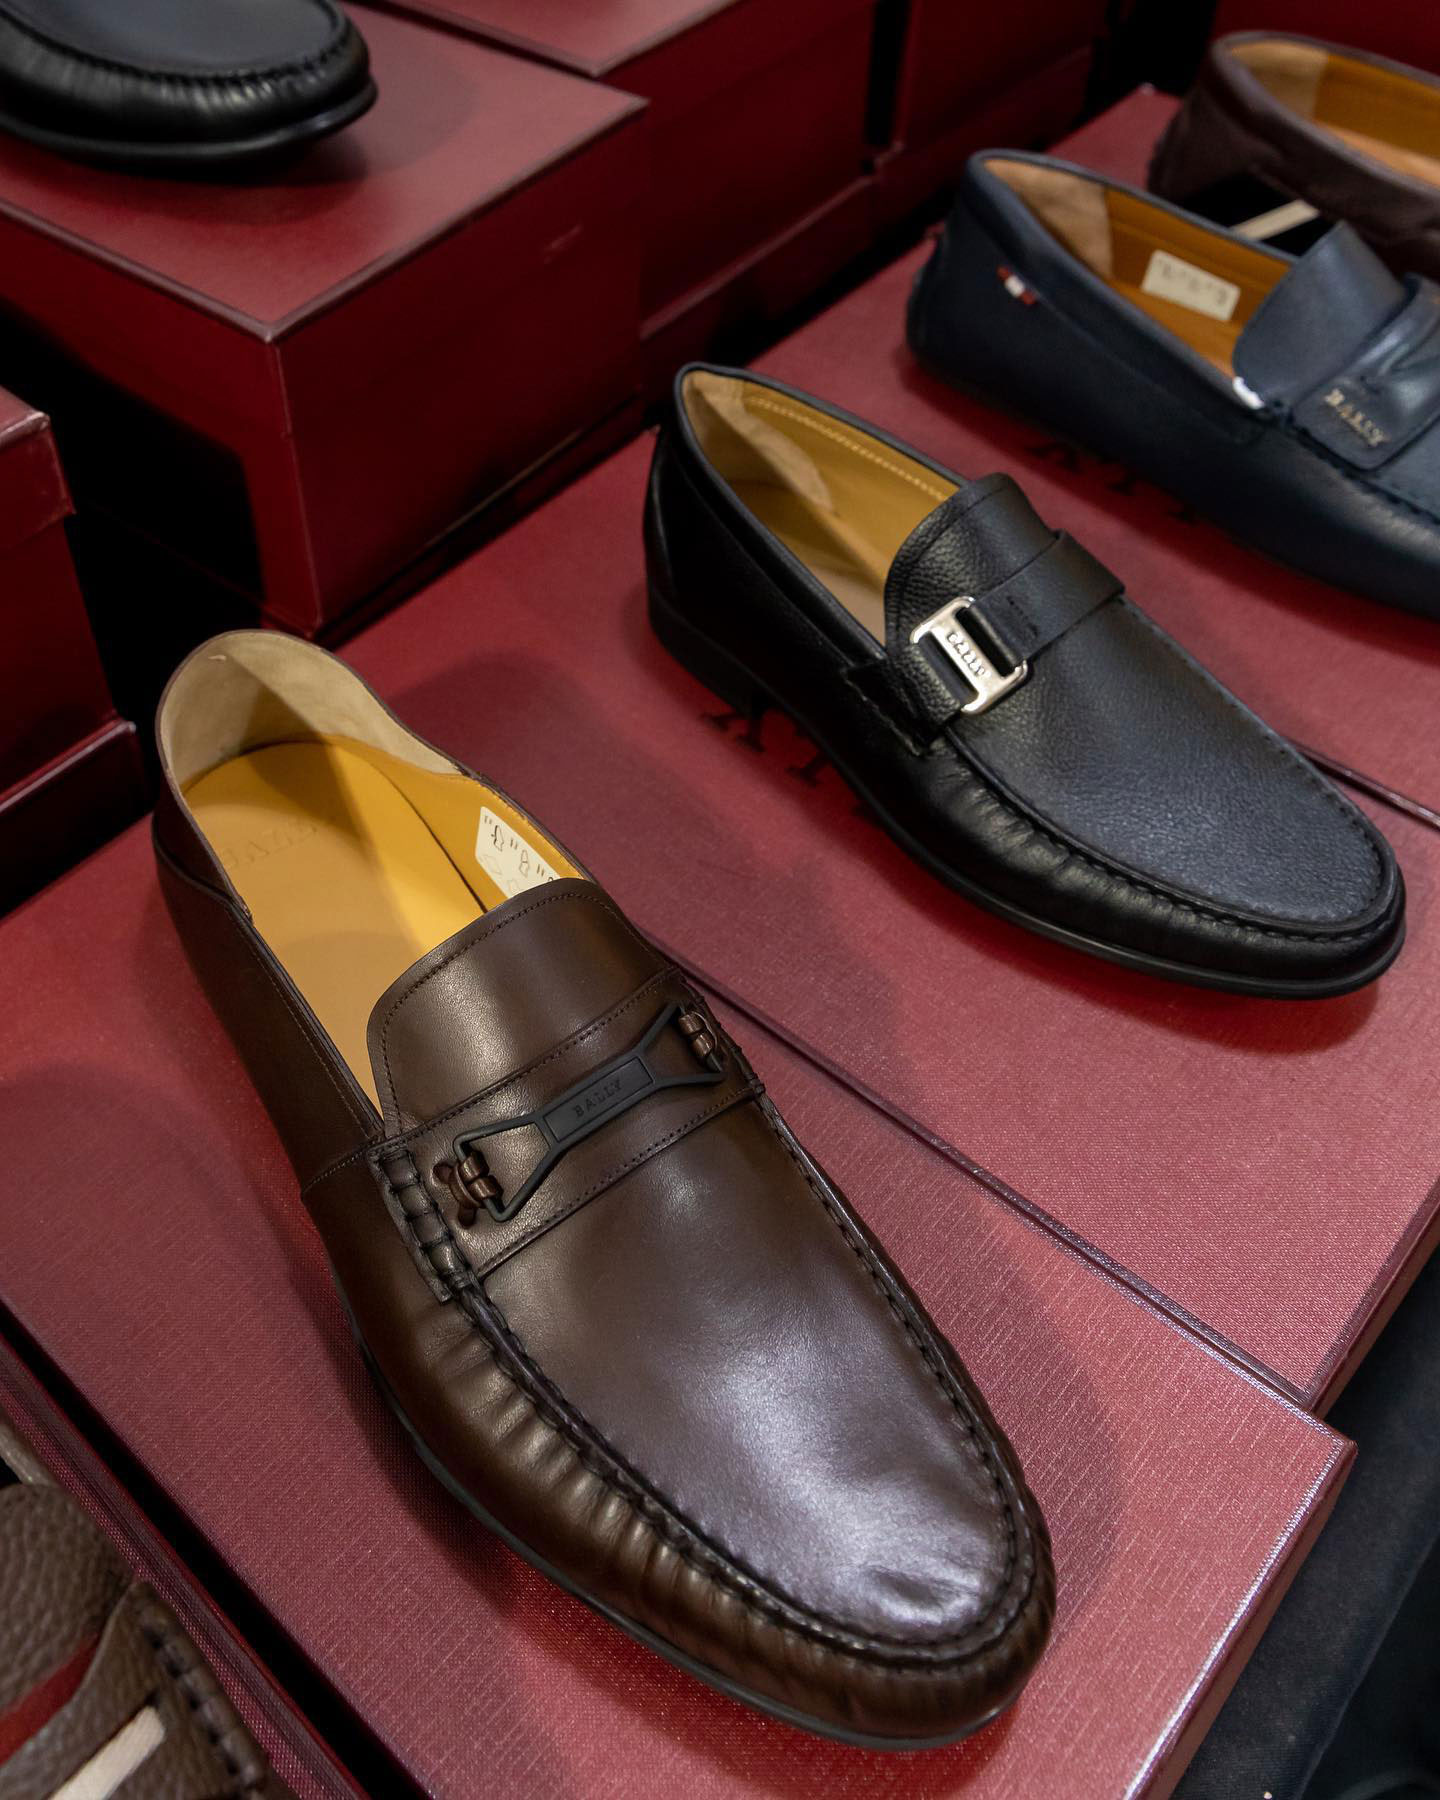 Bally Apparel & Accessories New York Sample Sale in Images